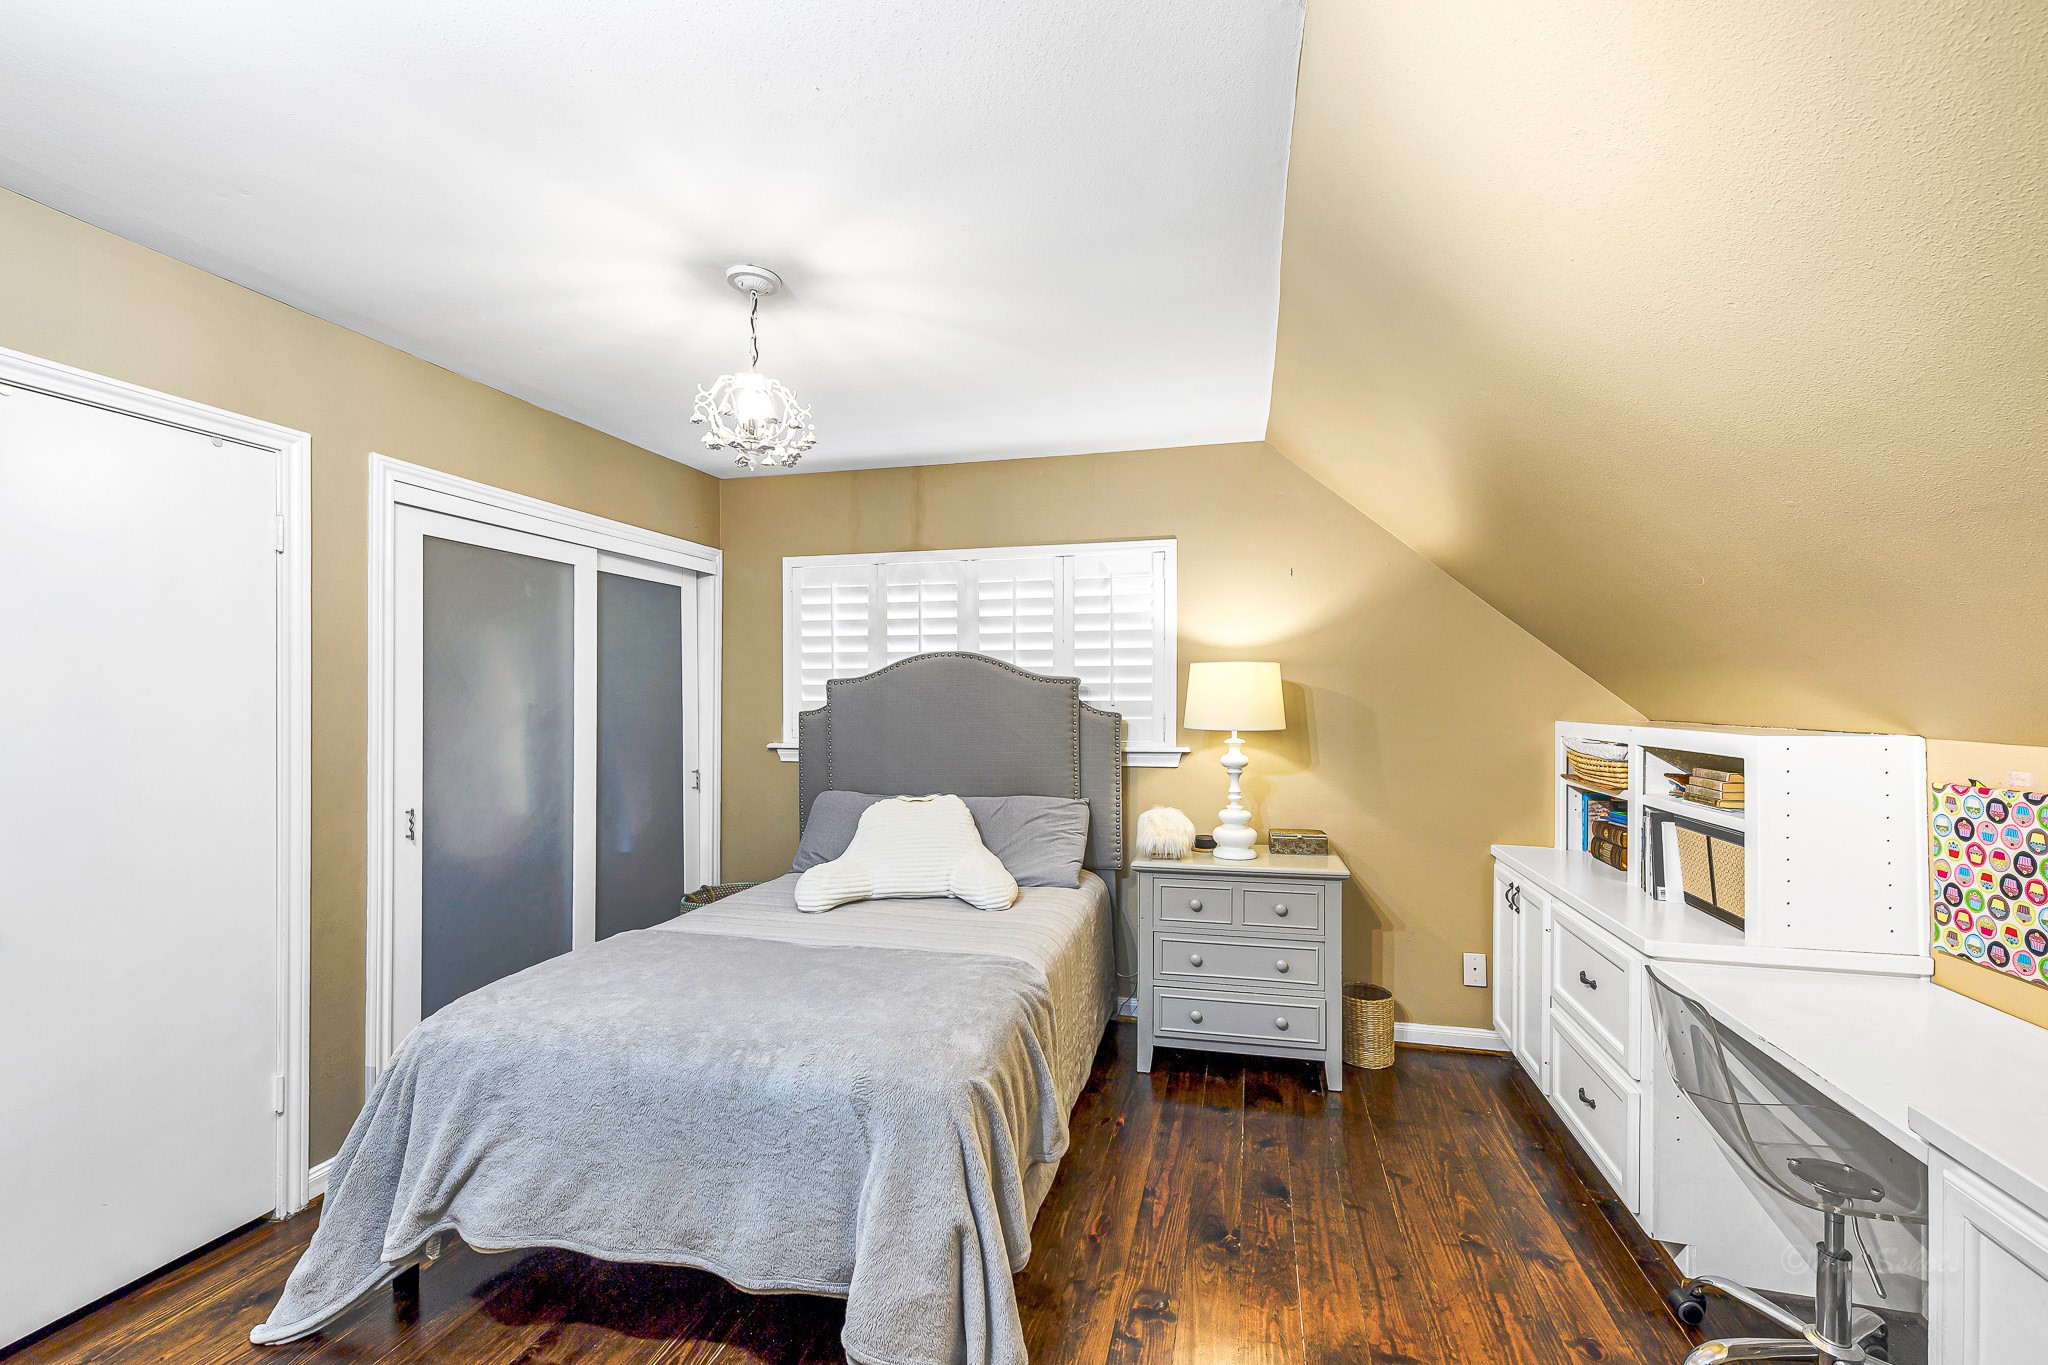 This bedroom is designed for both relaxation and organization. The double closets provide ample storage space, while the custom built-ins offer an opportunity to keep personal items neatly displayed.